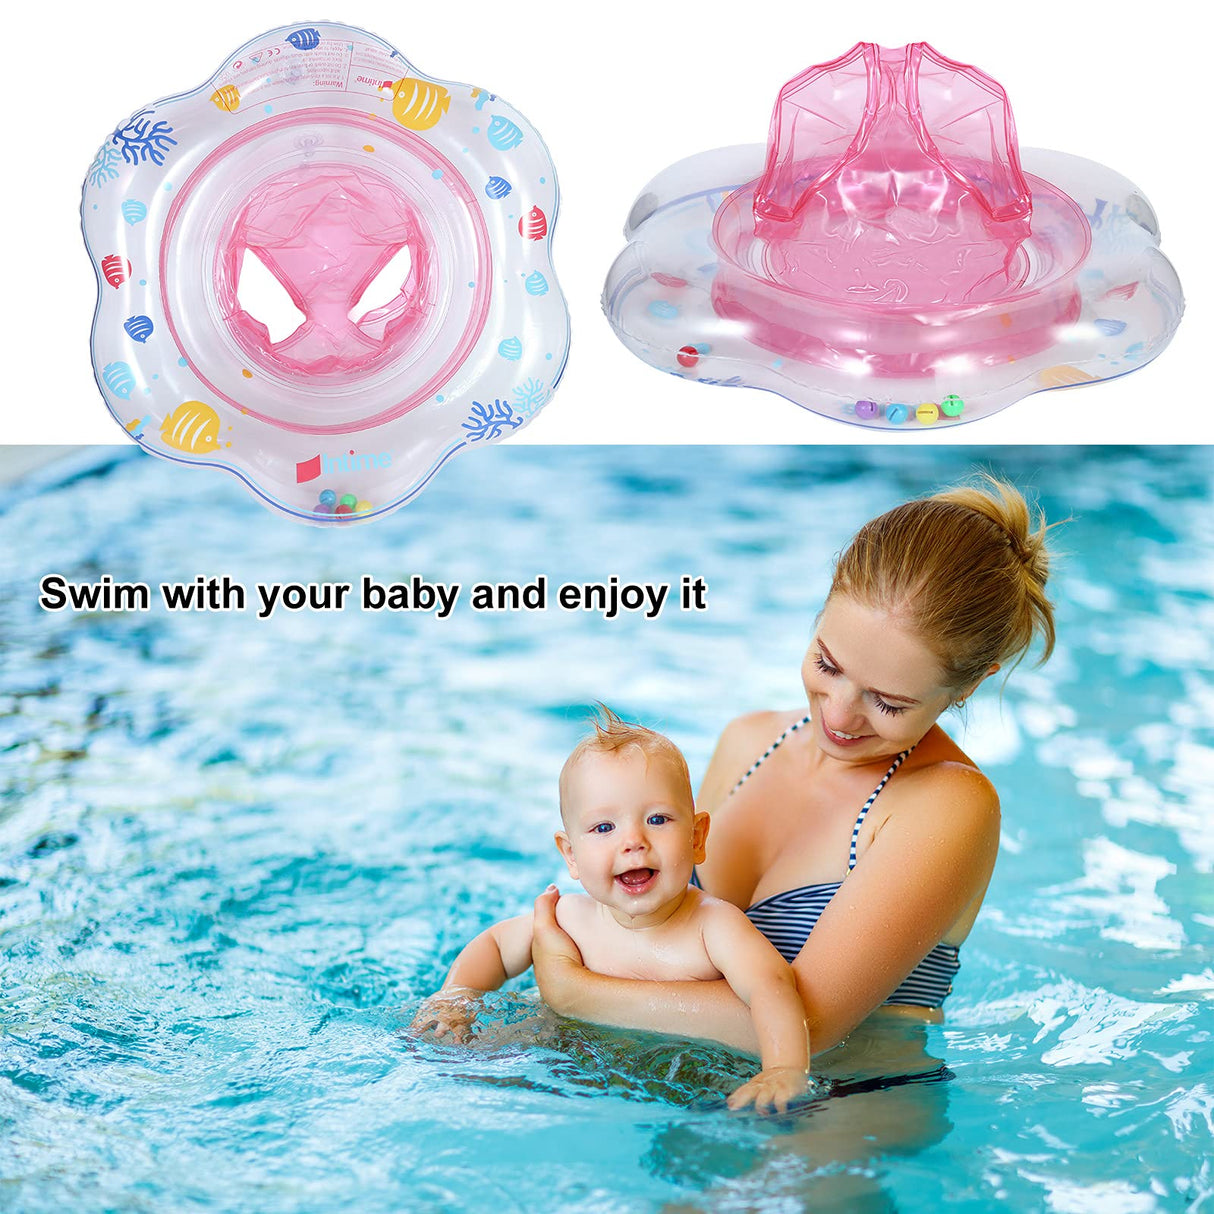 Baby Floats for Pool, Baby Swimming Floats with Safety Seat, Swim Training for Baby of 6-18 Months